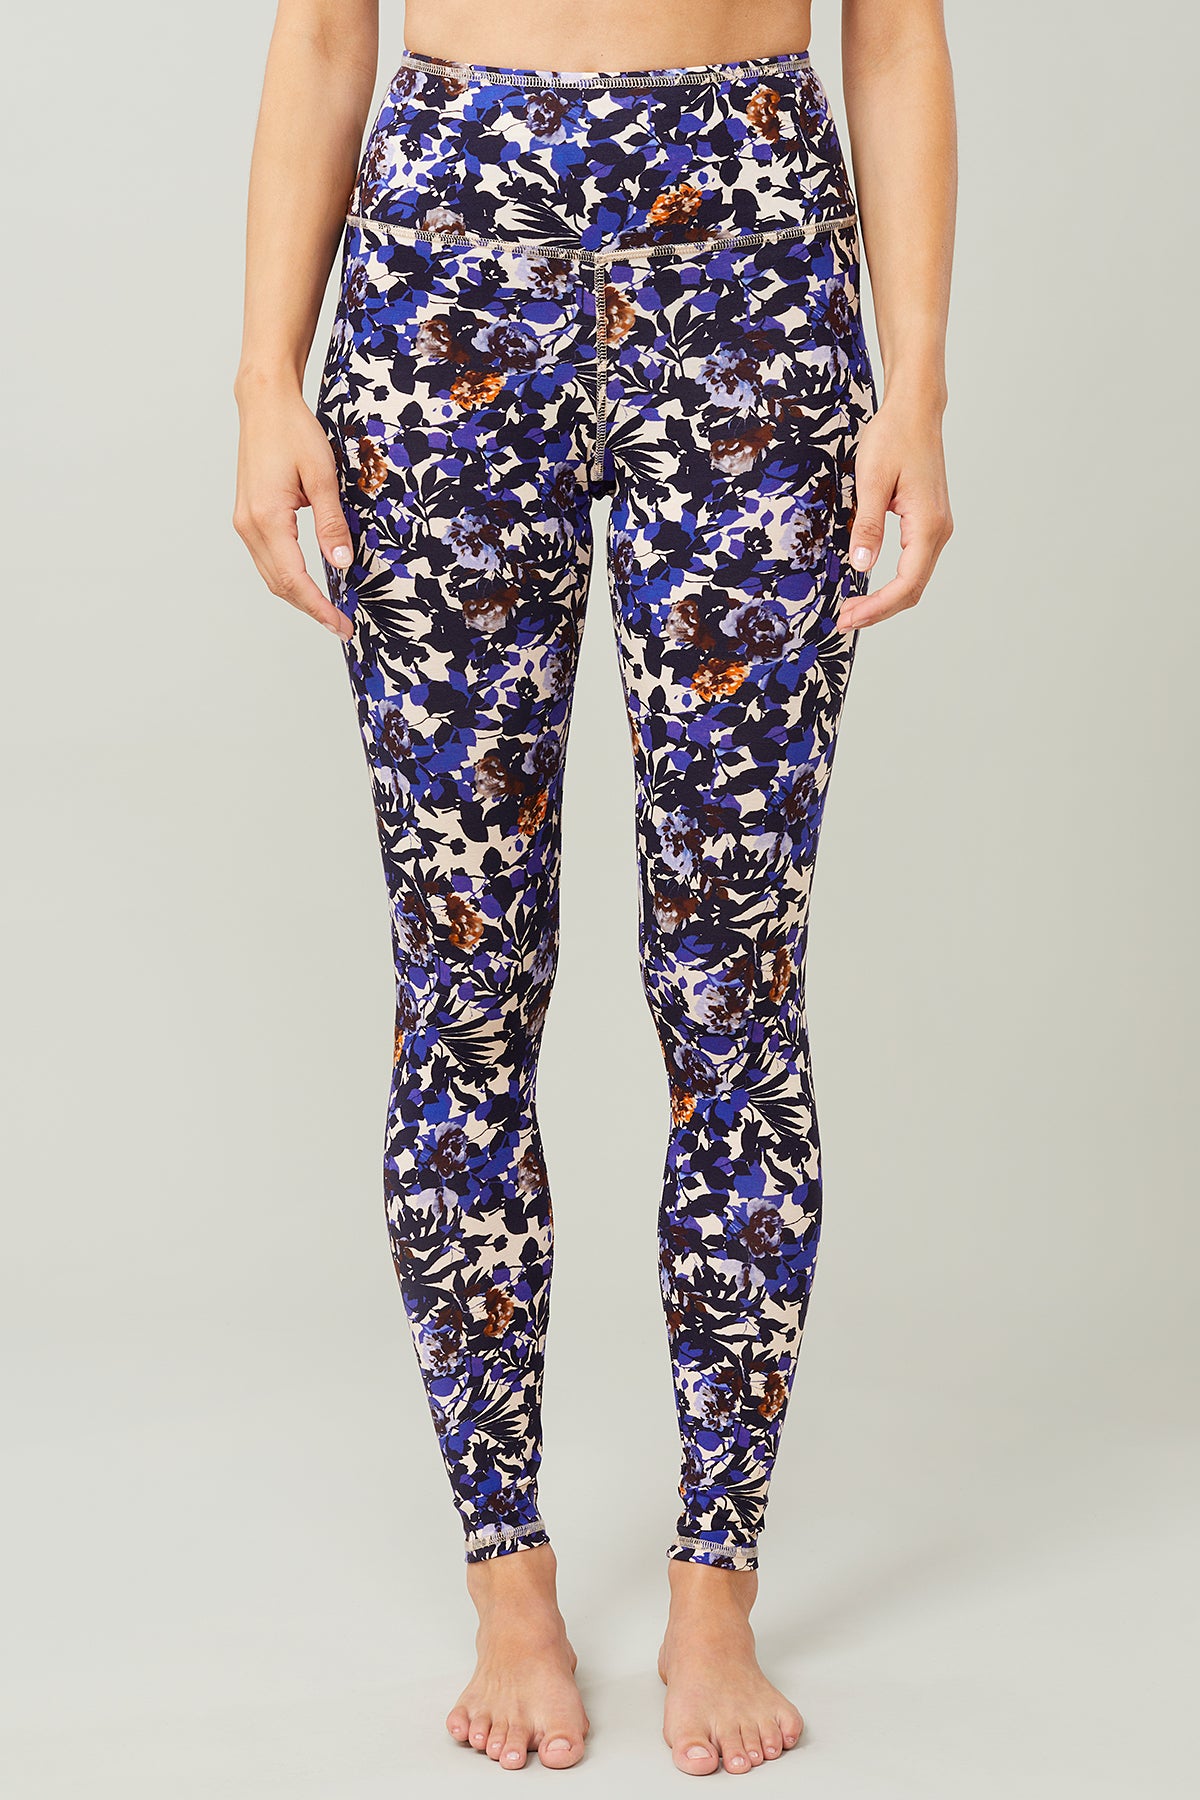 JOCKEY Ruby Printed Yoga Pant in Gurgaon at best price by Anmol Collections  - Justdial